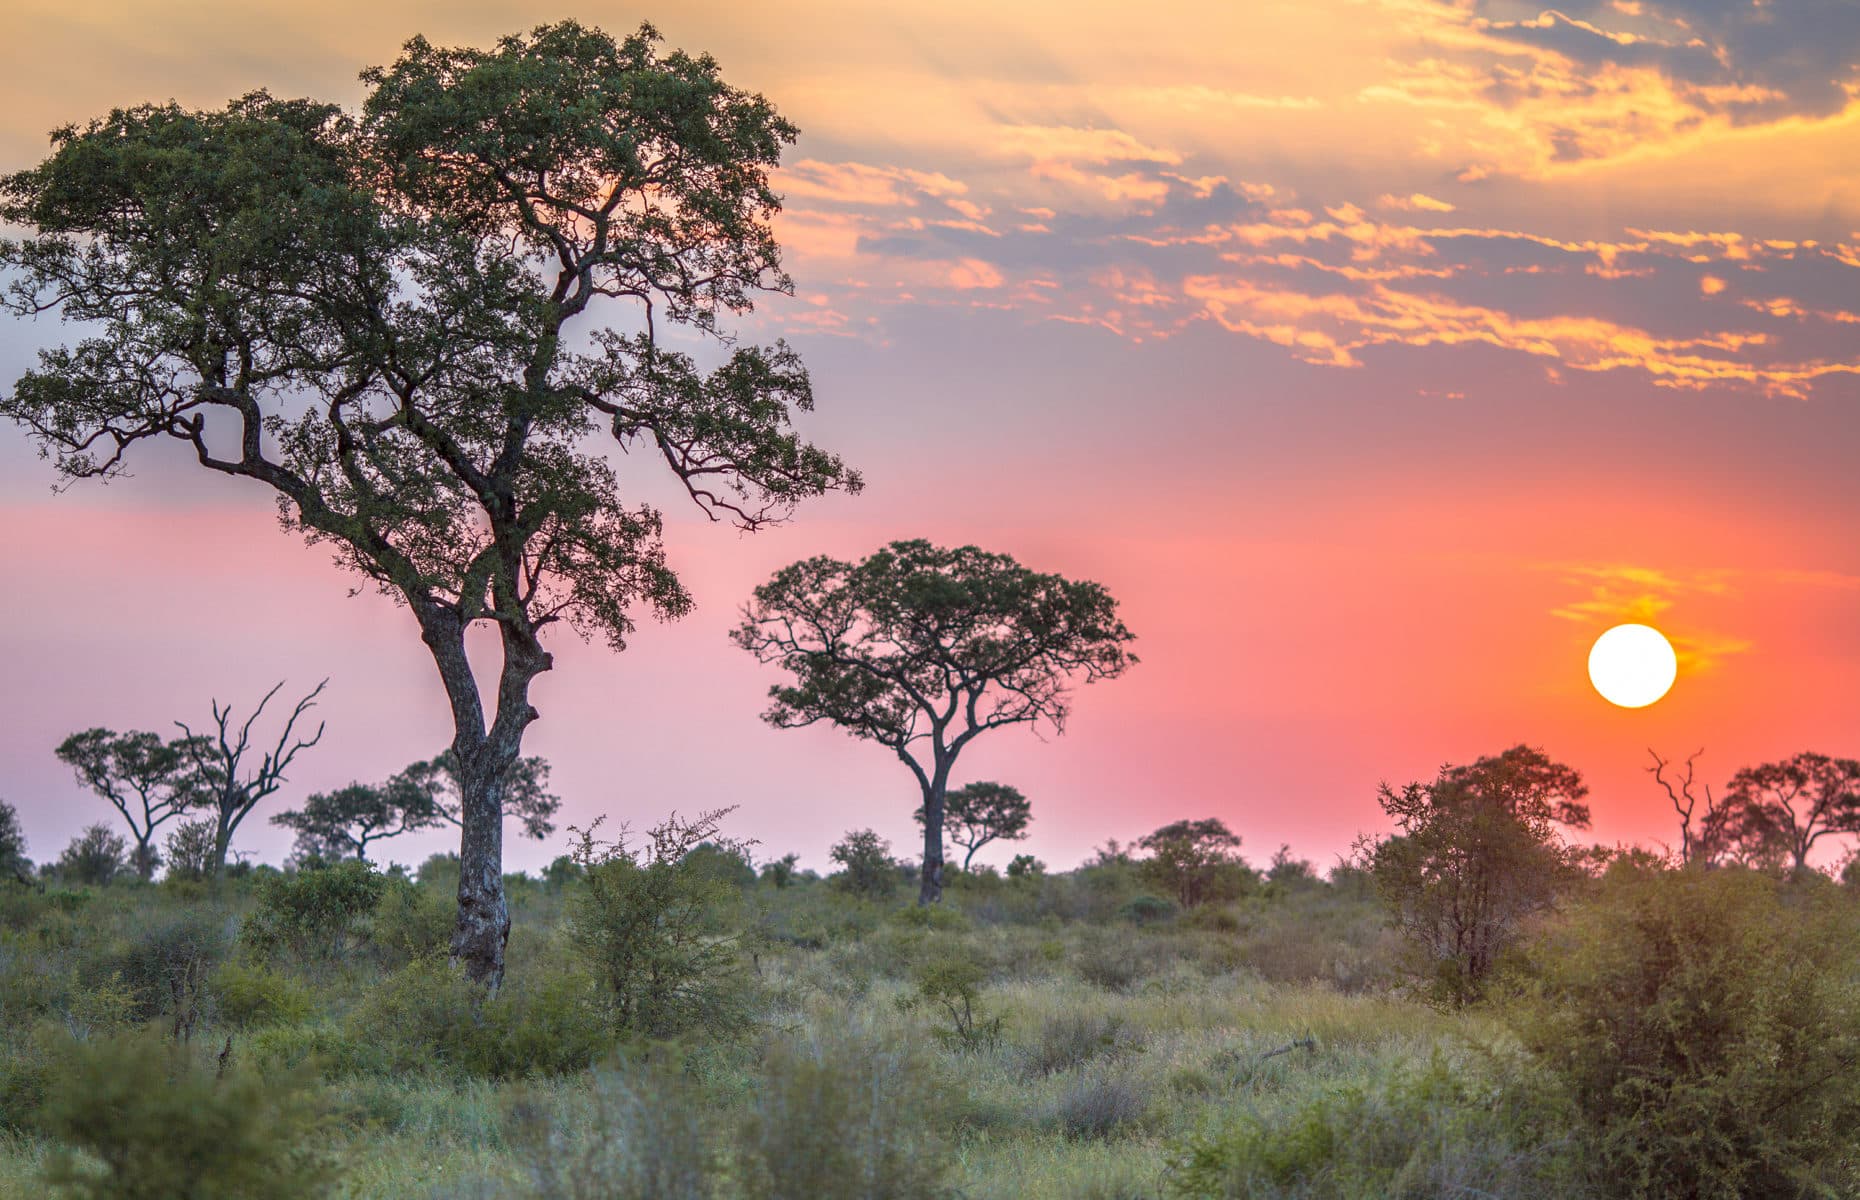 African Savanna plain overview with trees bushes and grass at sunset in Kruger national park South Africa